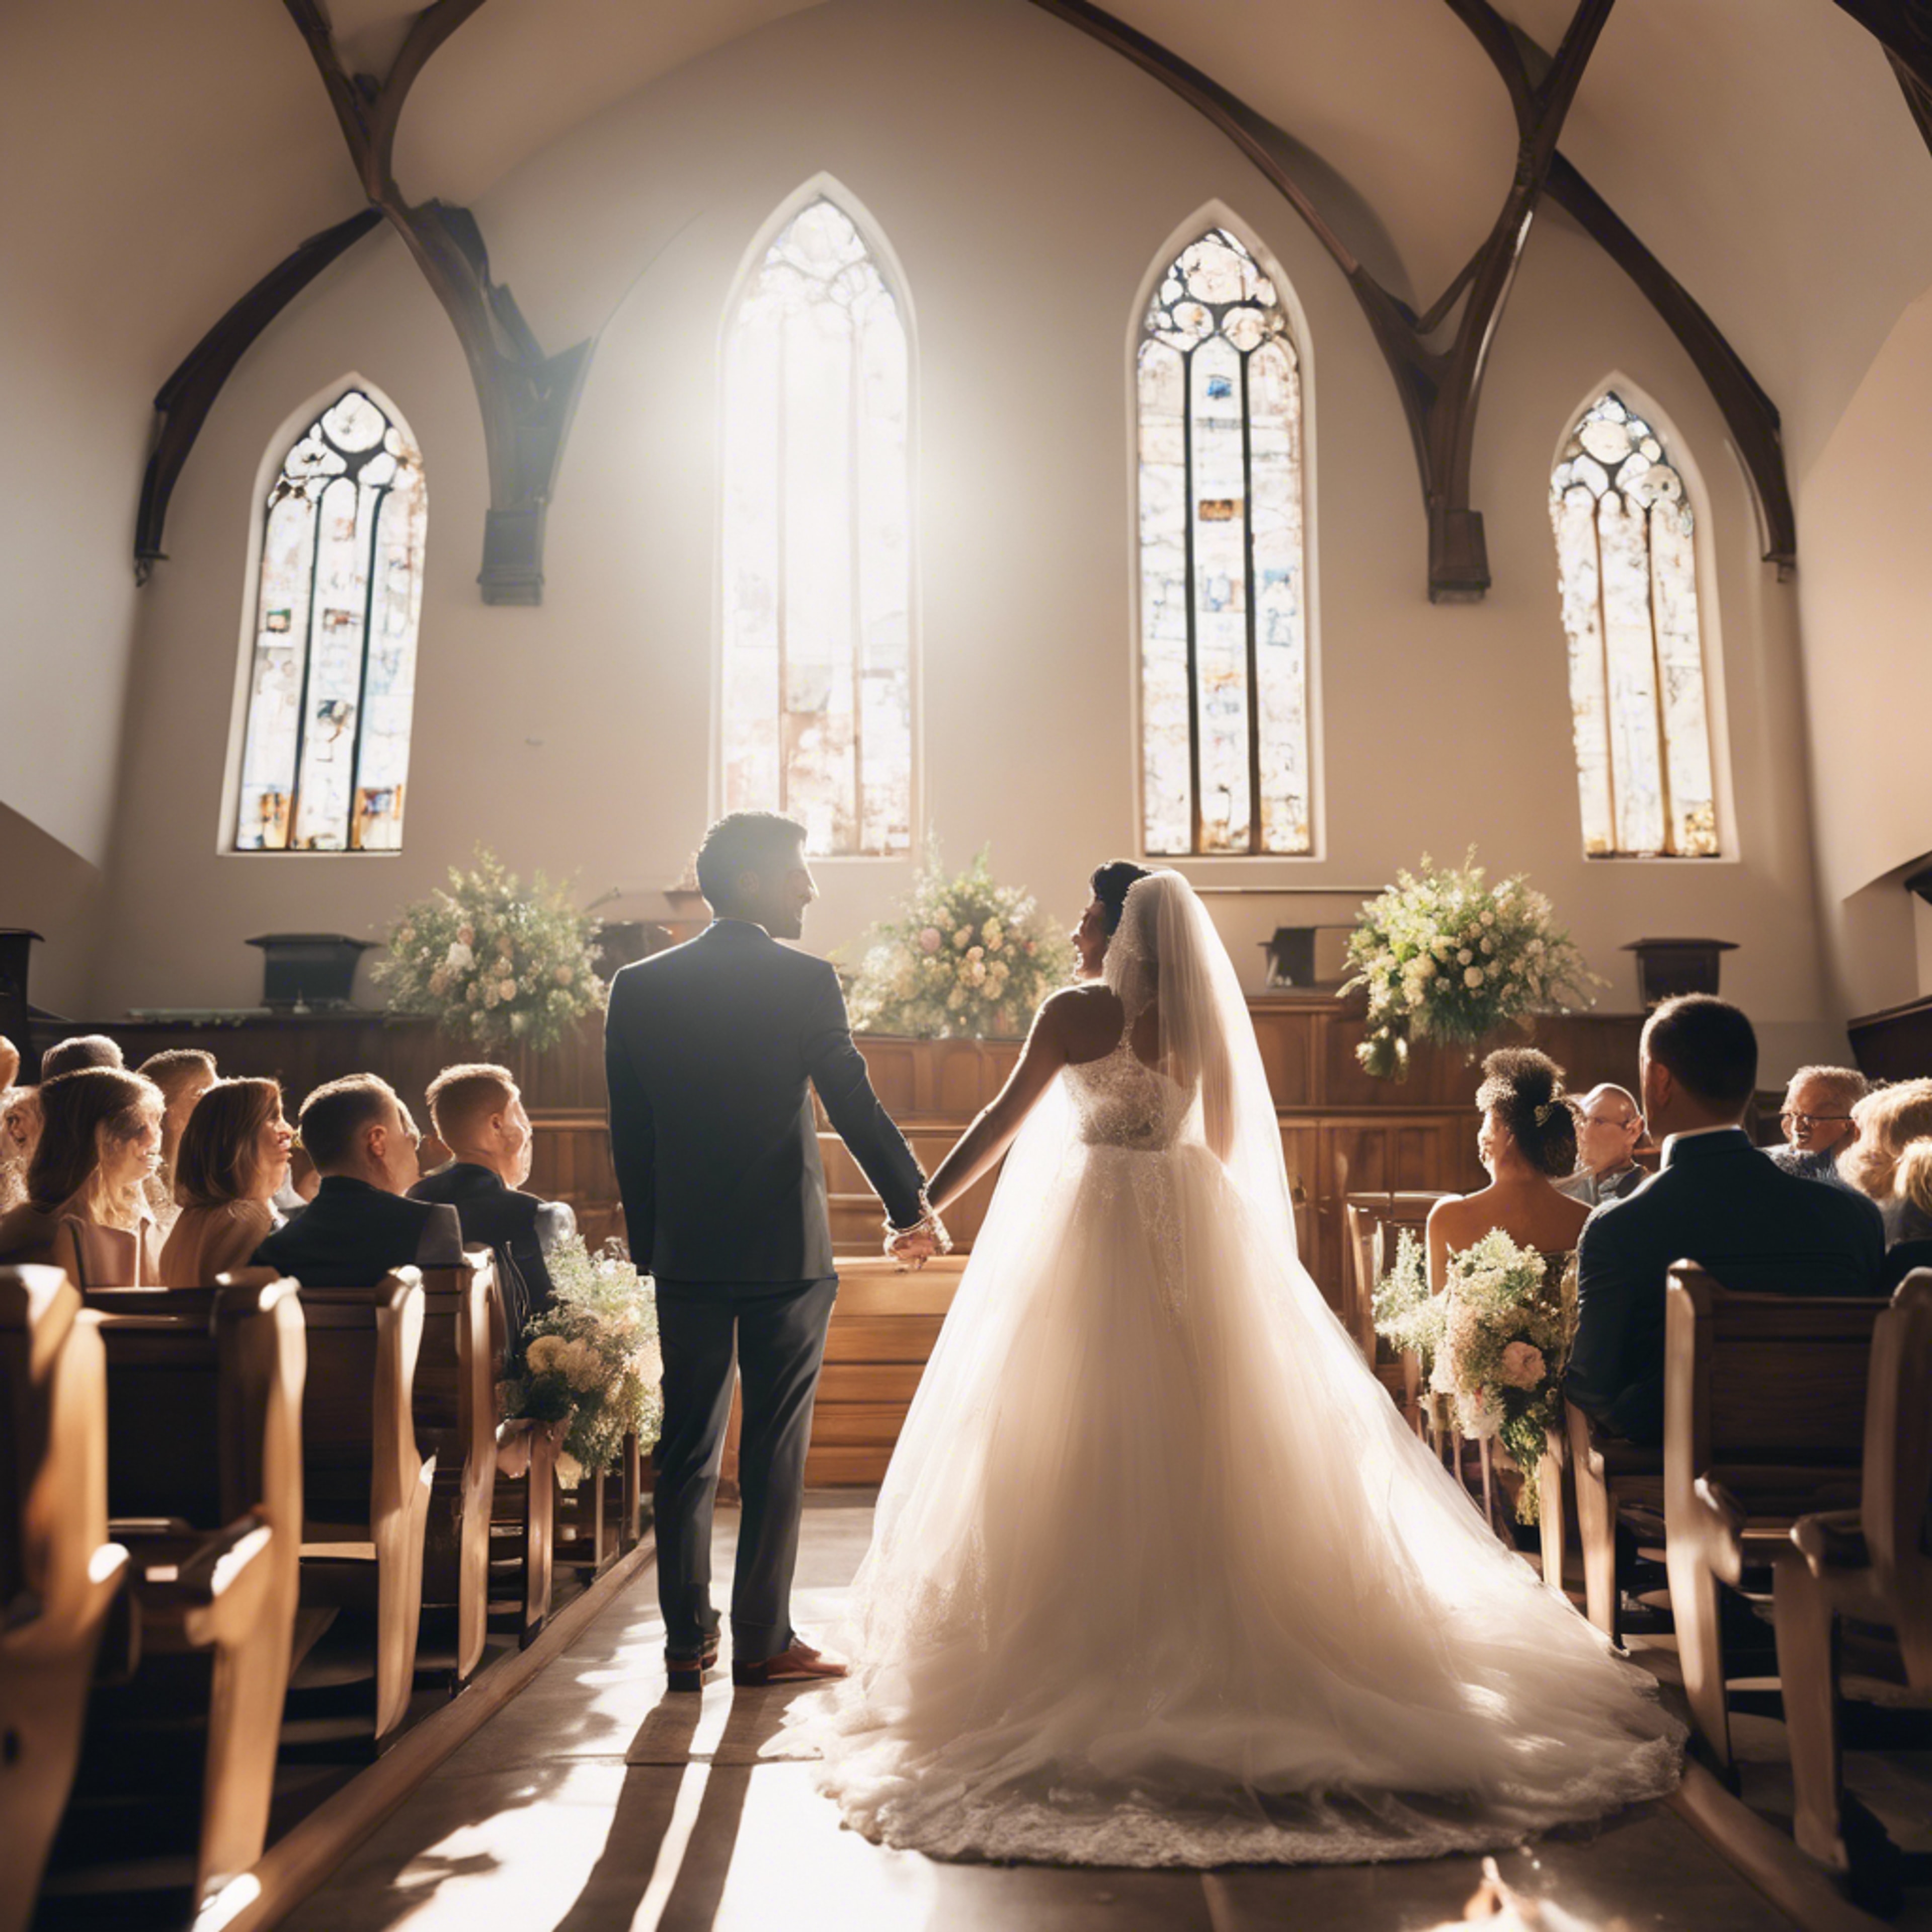 A happy couple getting married in a sunlit church, filled with joy and love. 墙纸[c91a19bd1c8e4c9b9bbb]